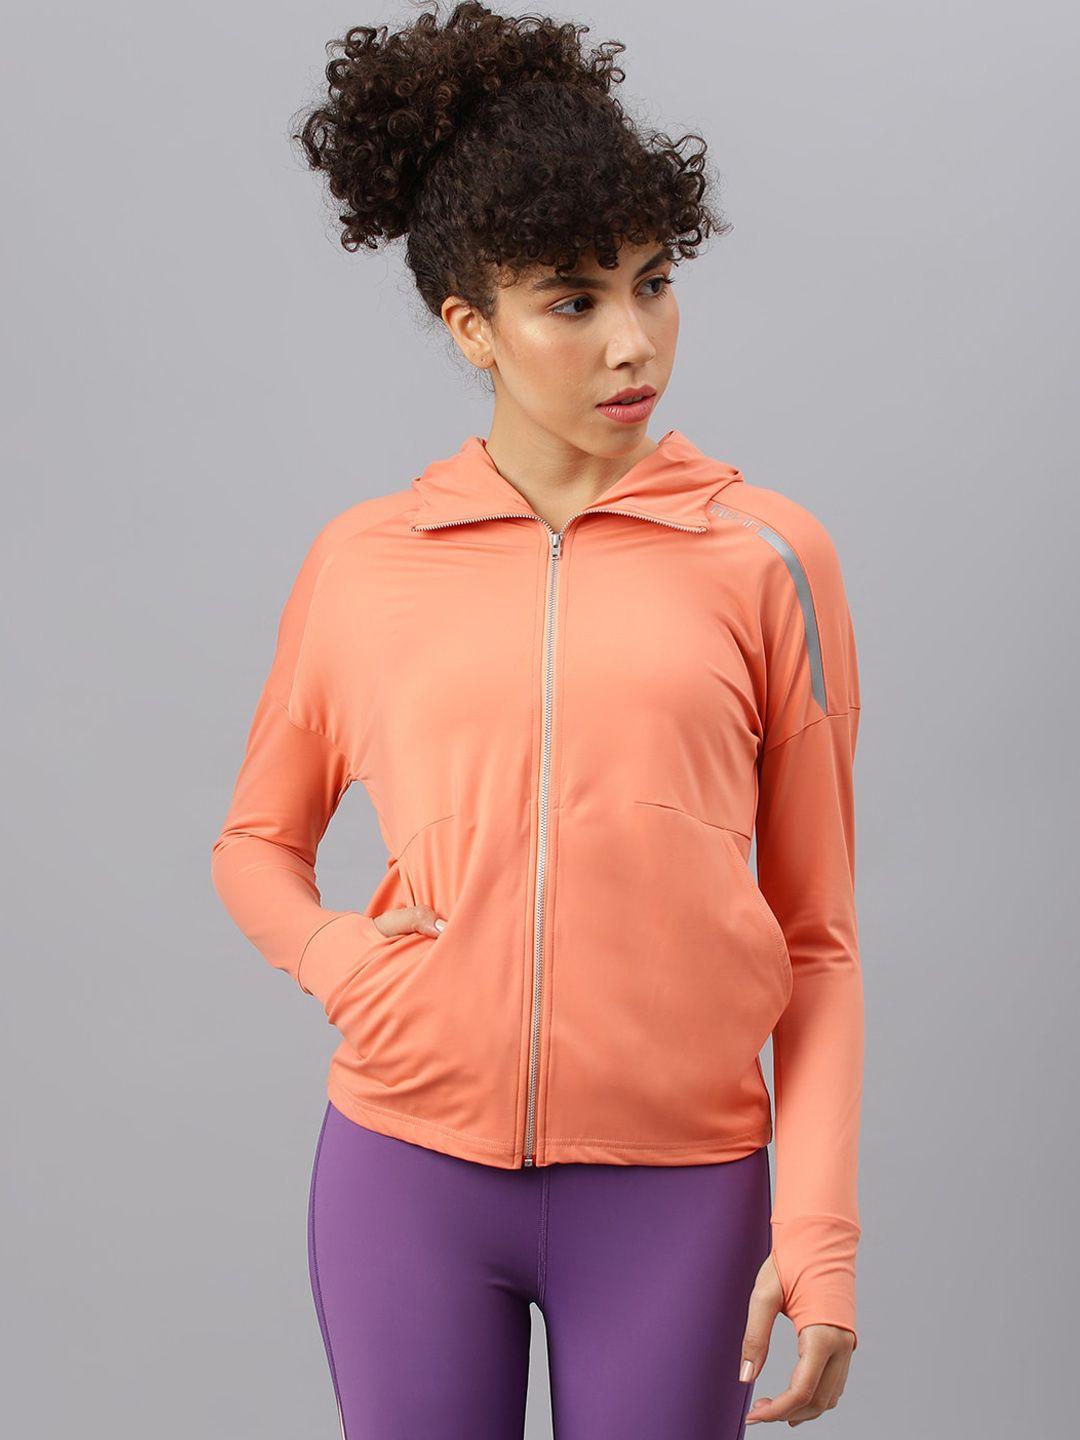 fitkin-women-lightweight-training-or-gym-sporty-jacket